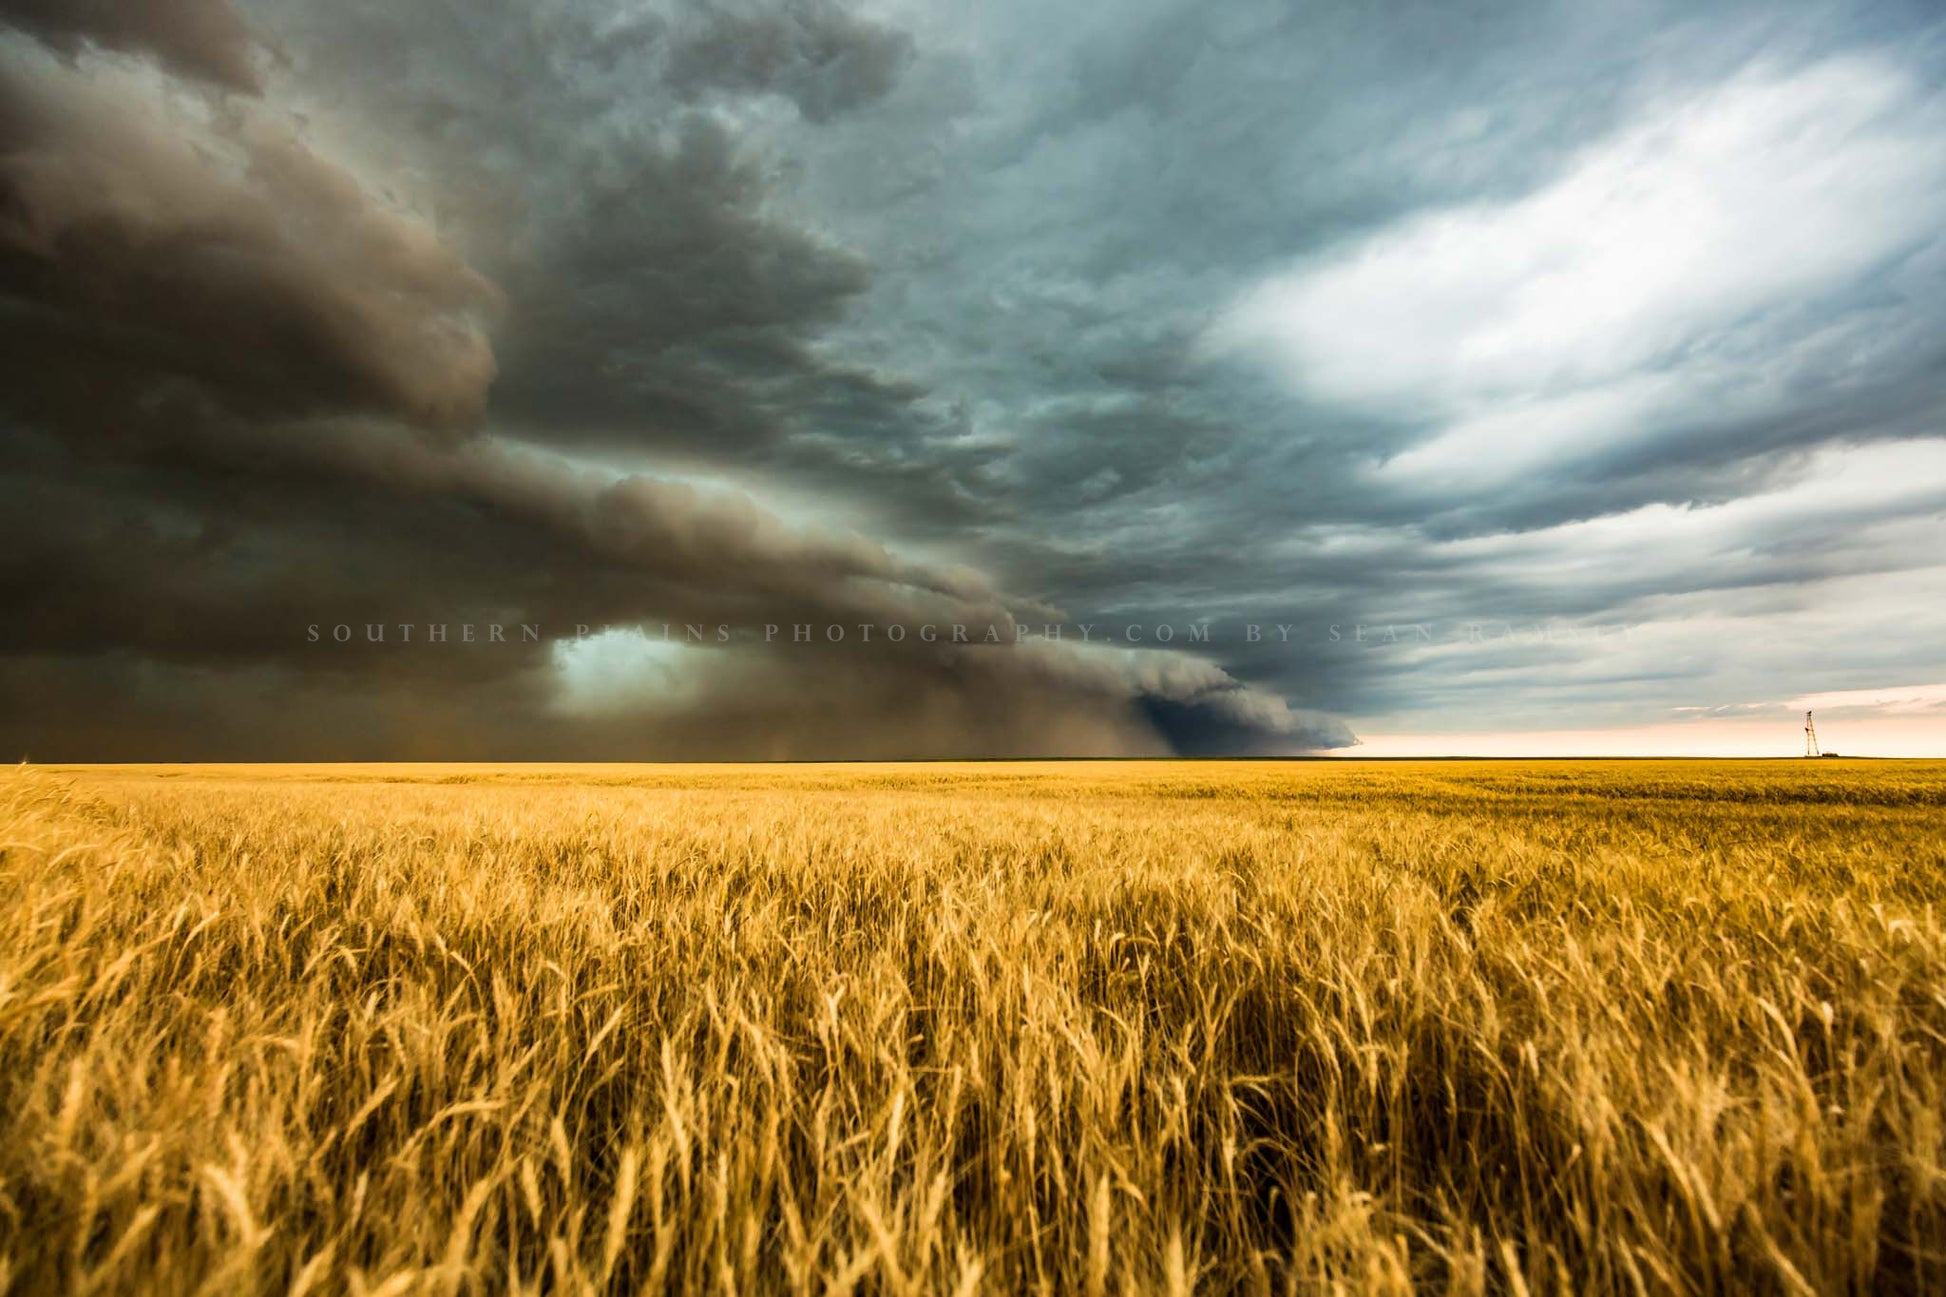 Storm photography print of a haboob thunderstorm carrying dust over a golden wheat field on a stormy spring day on the plains of eastern Colorado by Sean Ramsey of Southern Plains Photography.